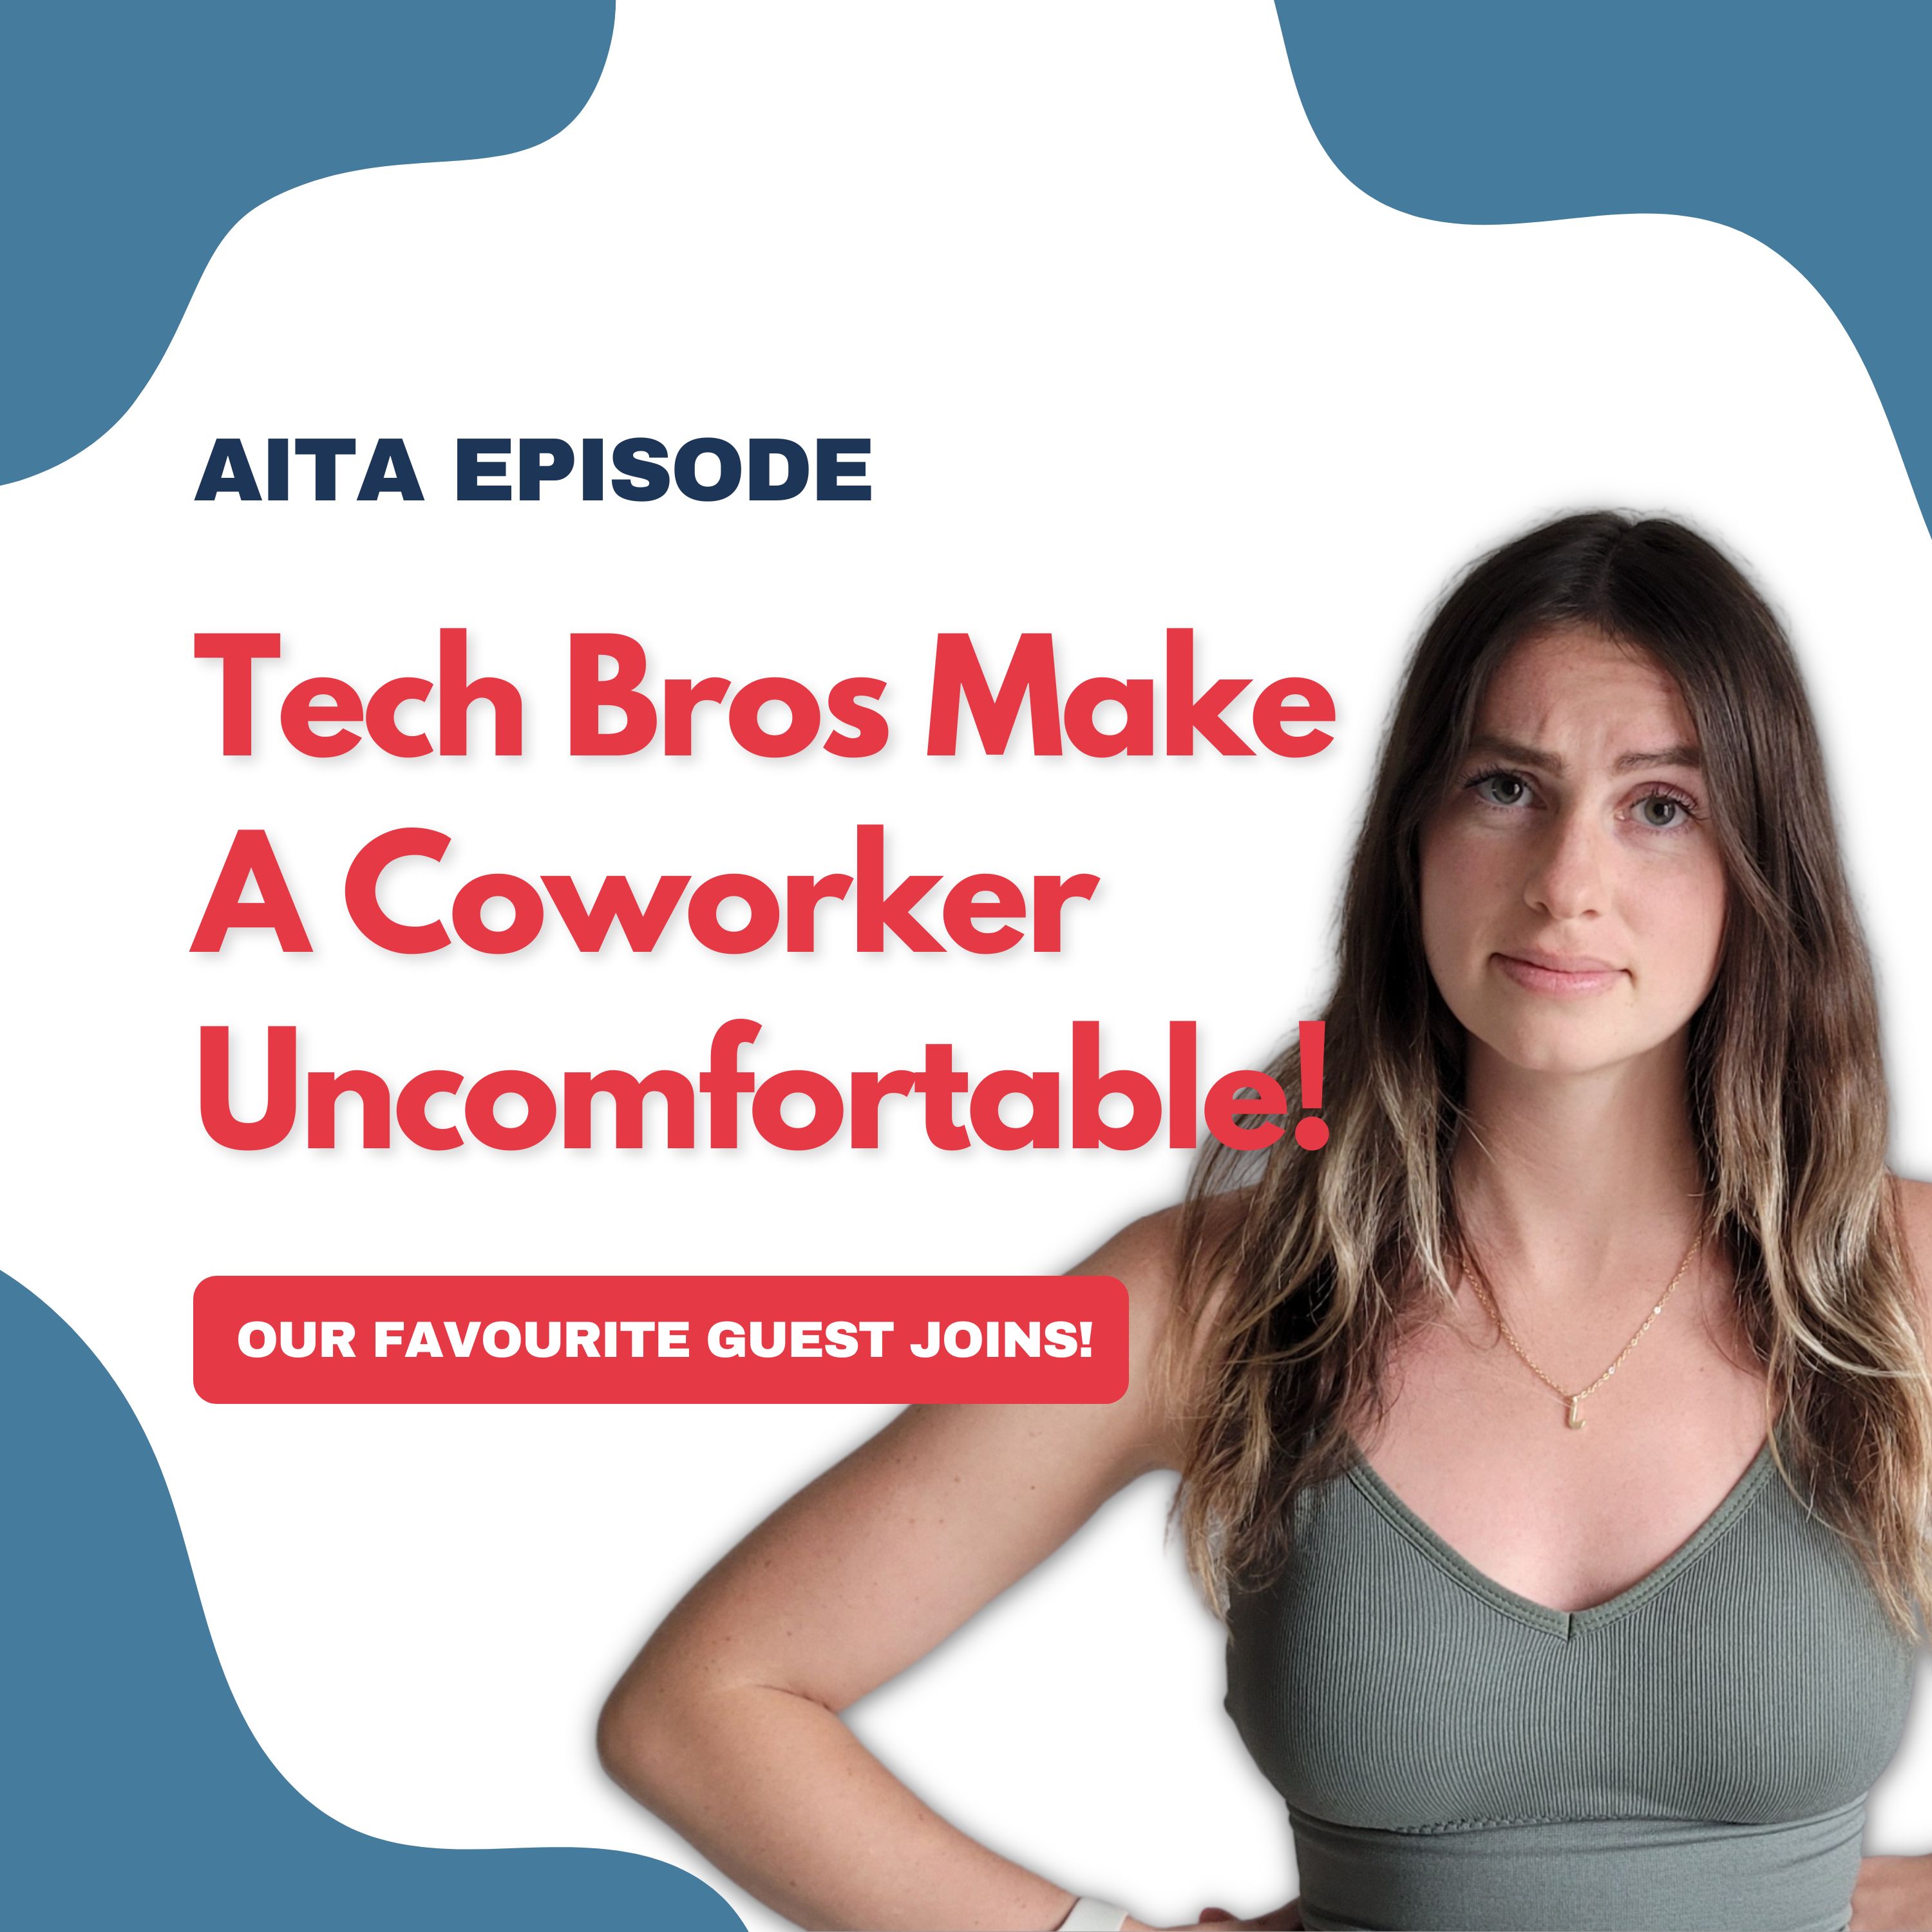 Am I The Asshole | Tech Bros Make A Coworker Uncomfortable! Image